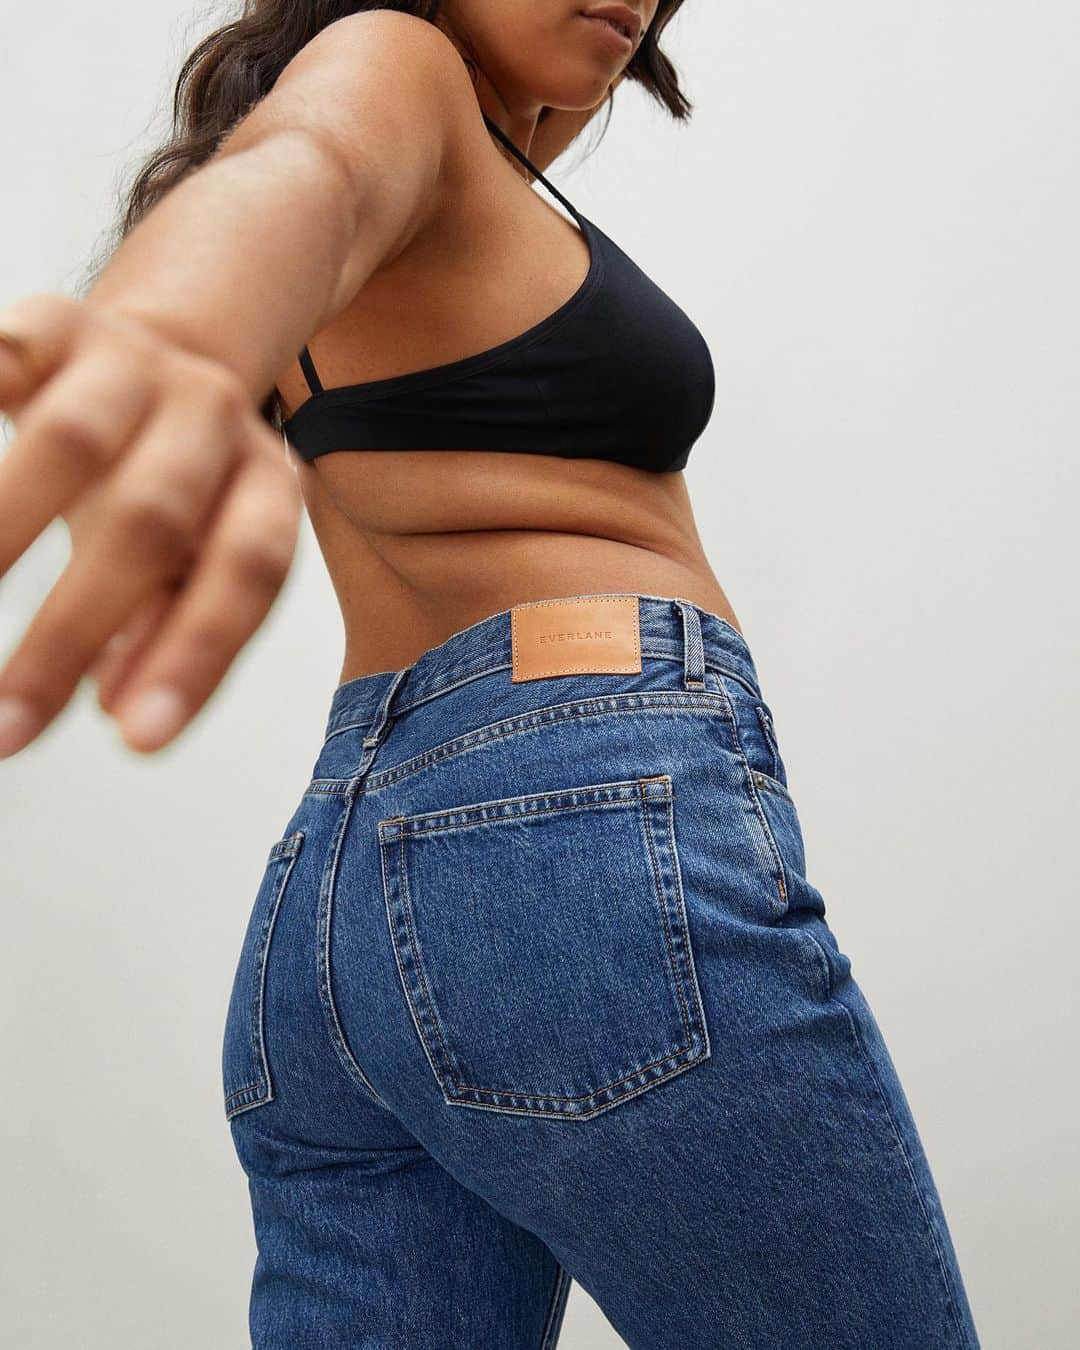 woman in bra and everlane jeans